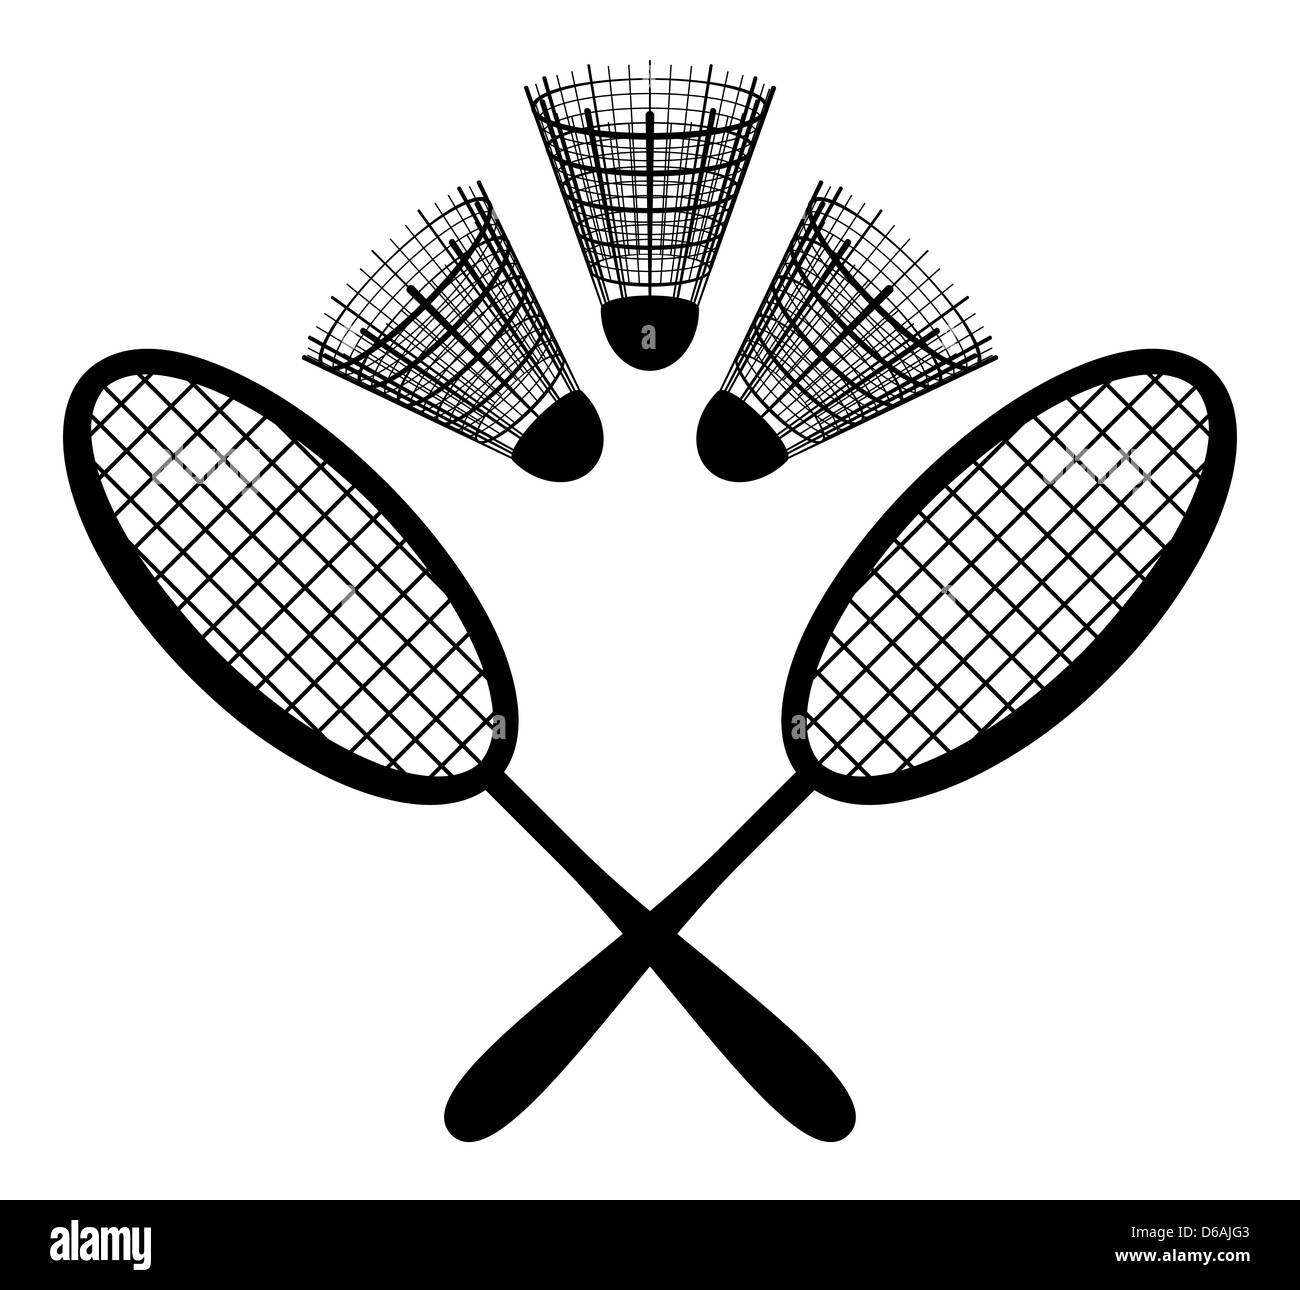 Equipment for the badminton, silhouette Stock Photo